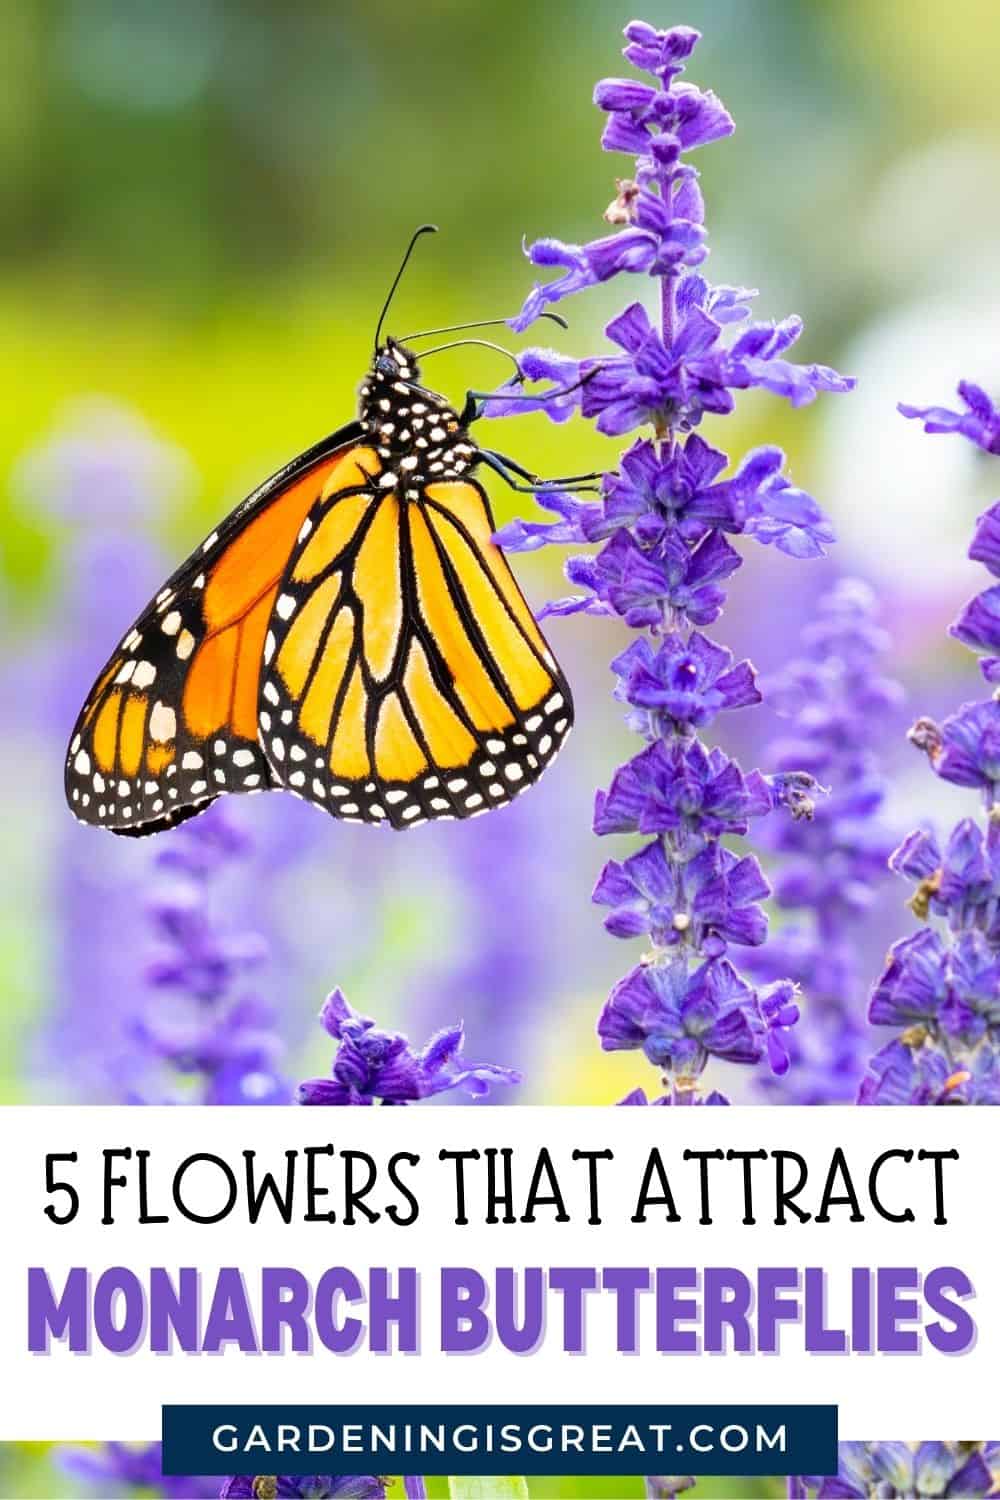 Flowers that attract monarch butterflies pin